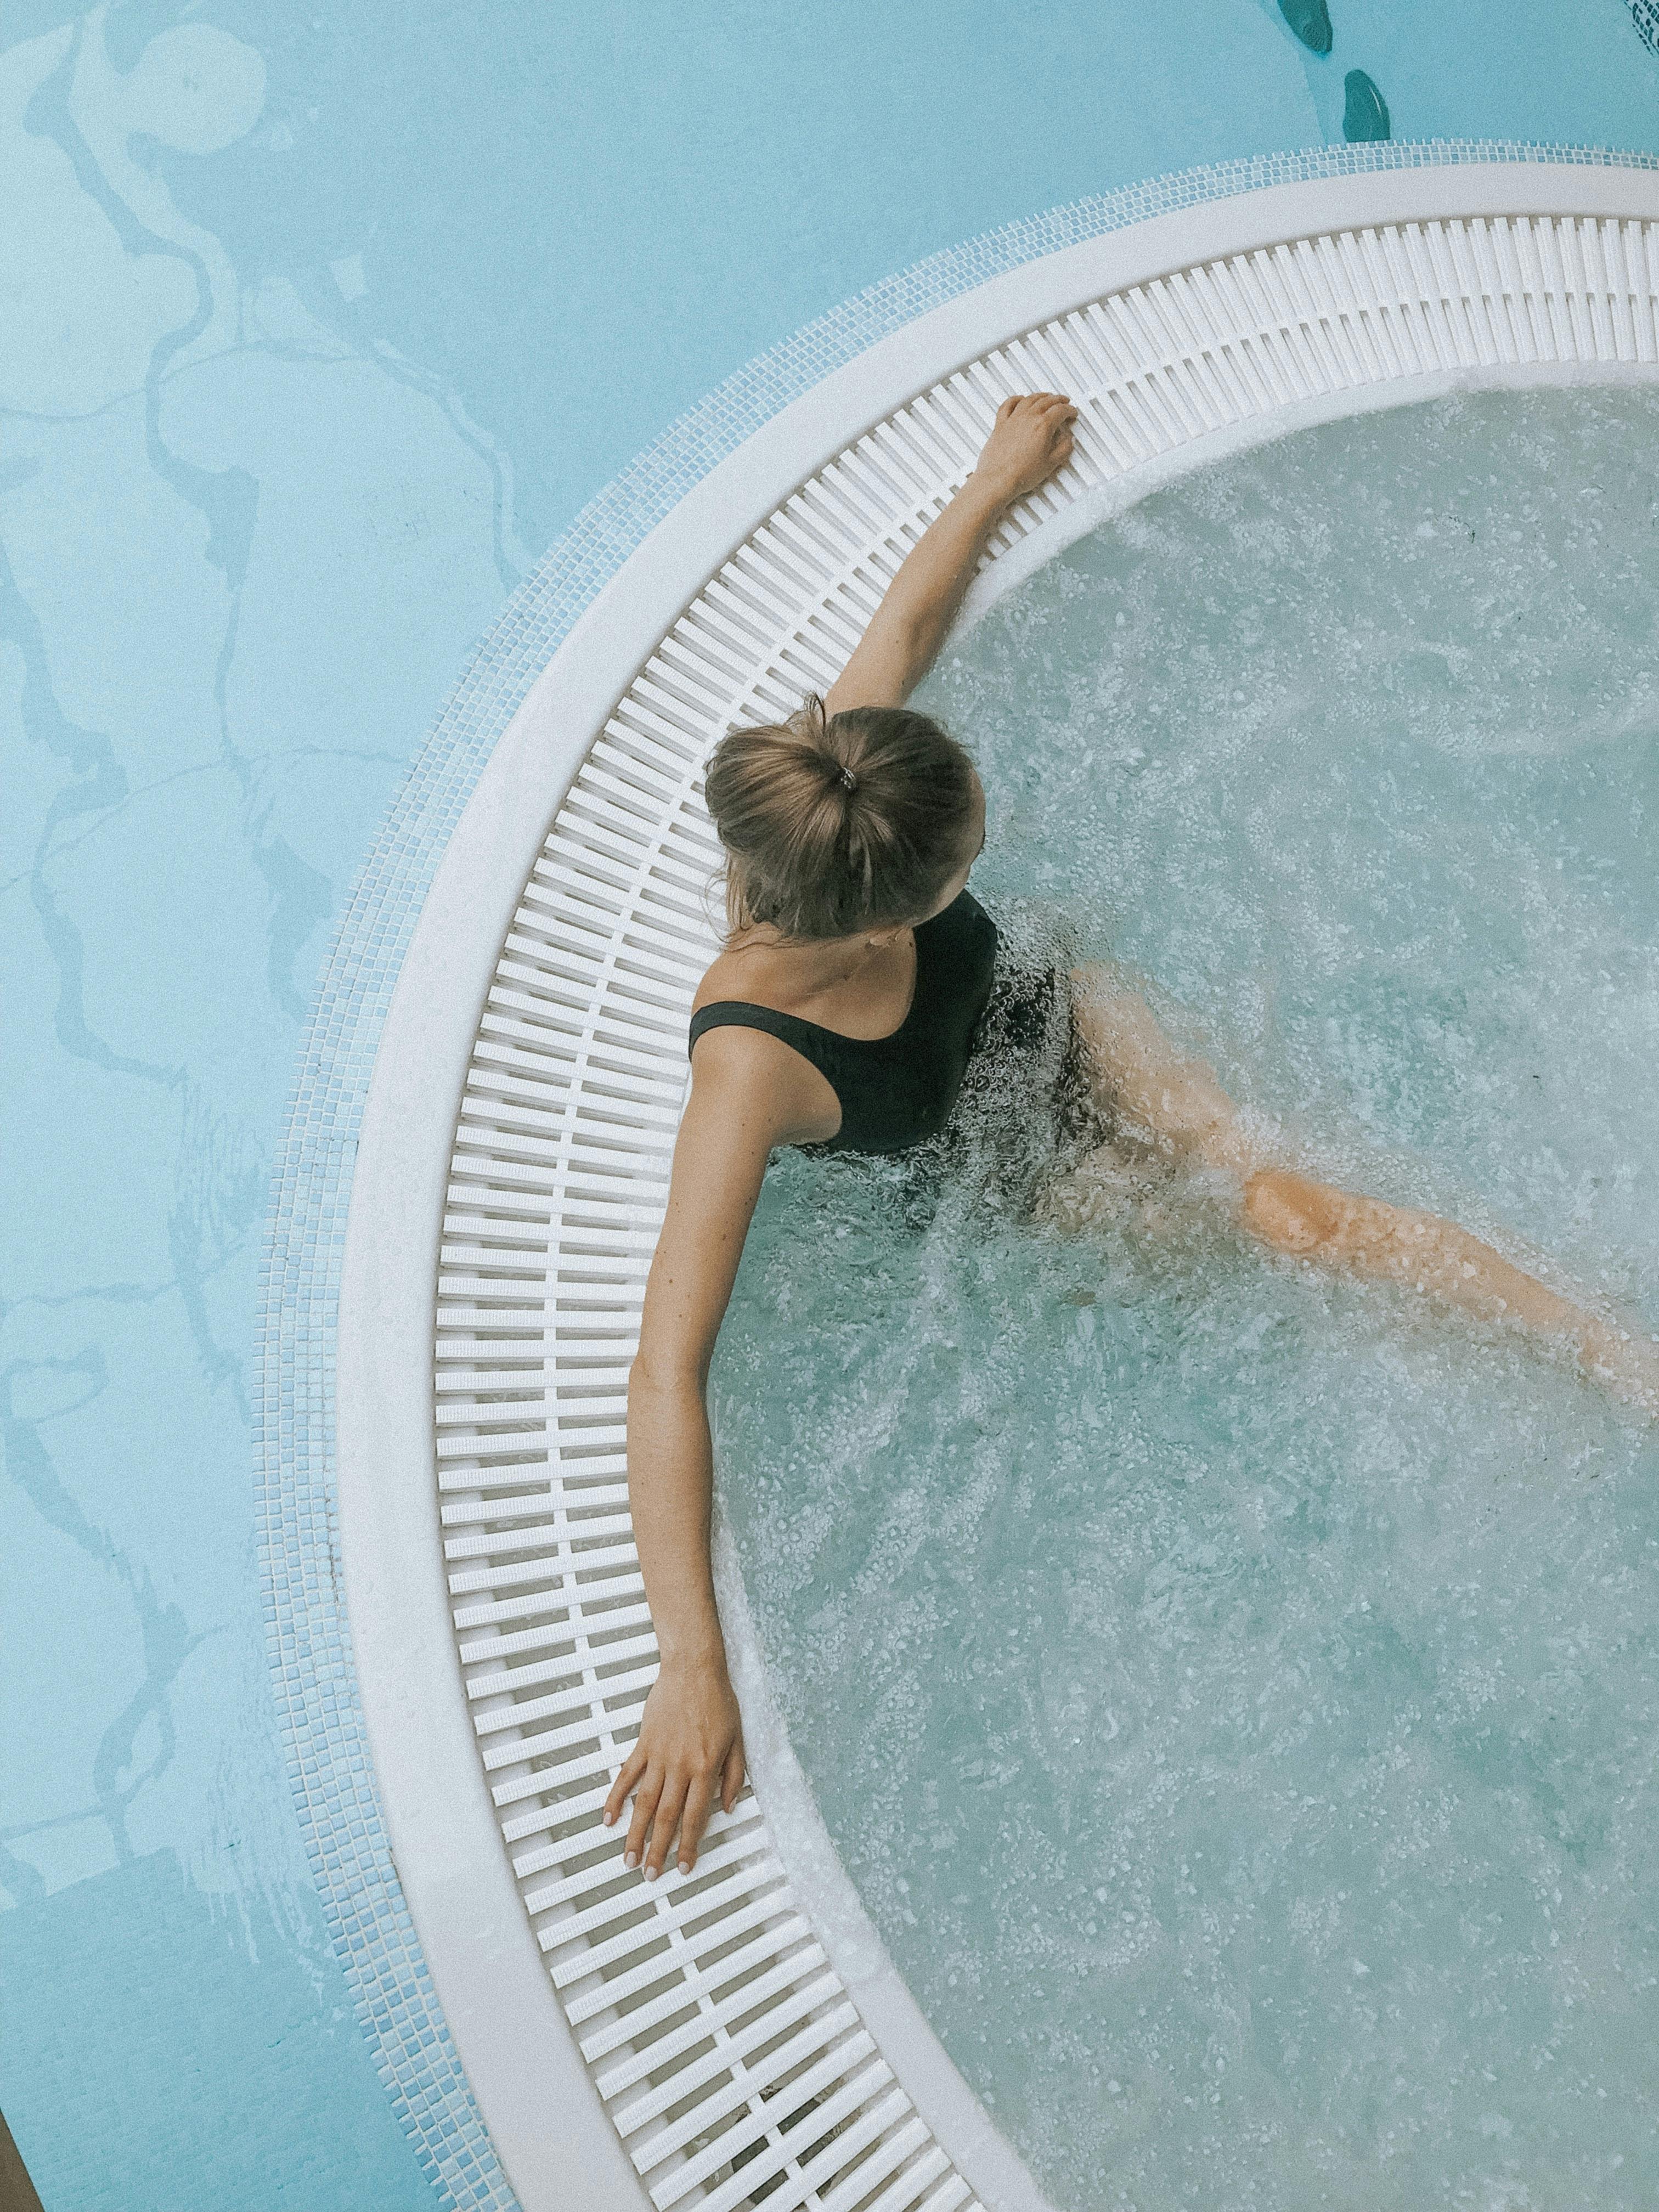 Combine hydrotherapy with exercise by incorporating easy exercise moves into your hot tub experience.